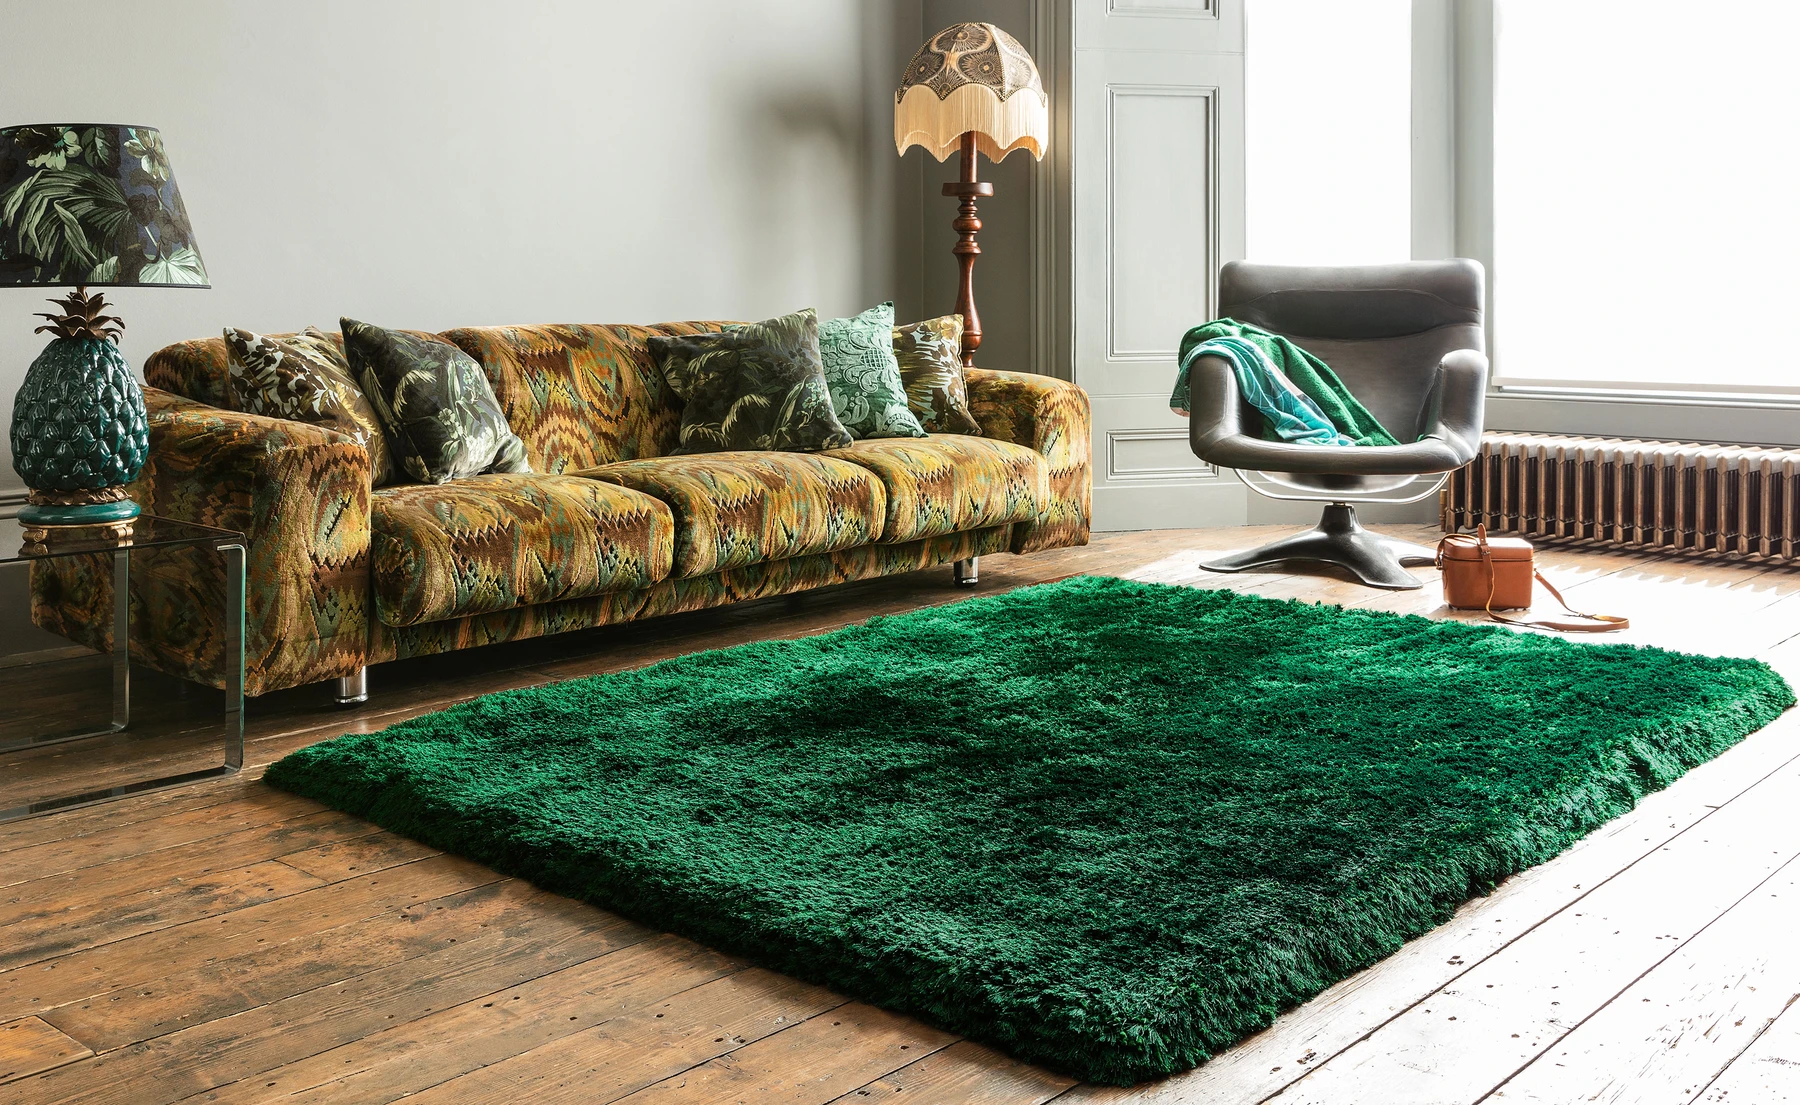 rug-feature-image_1800x1800